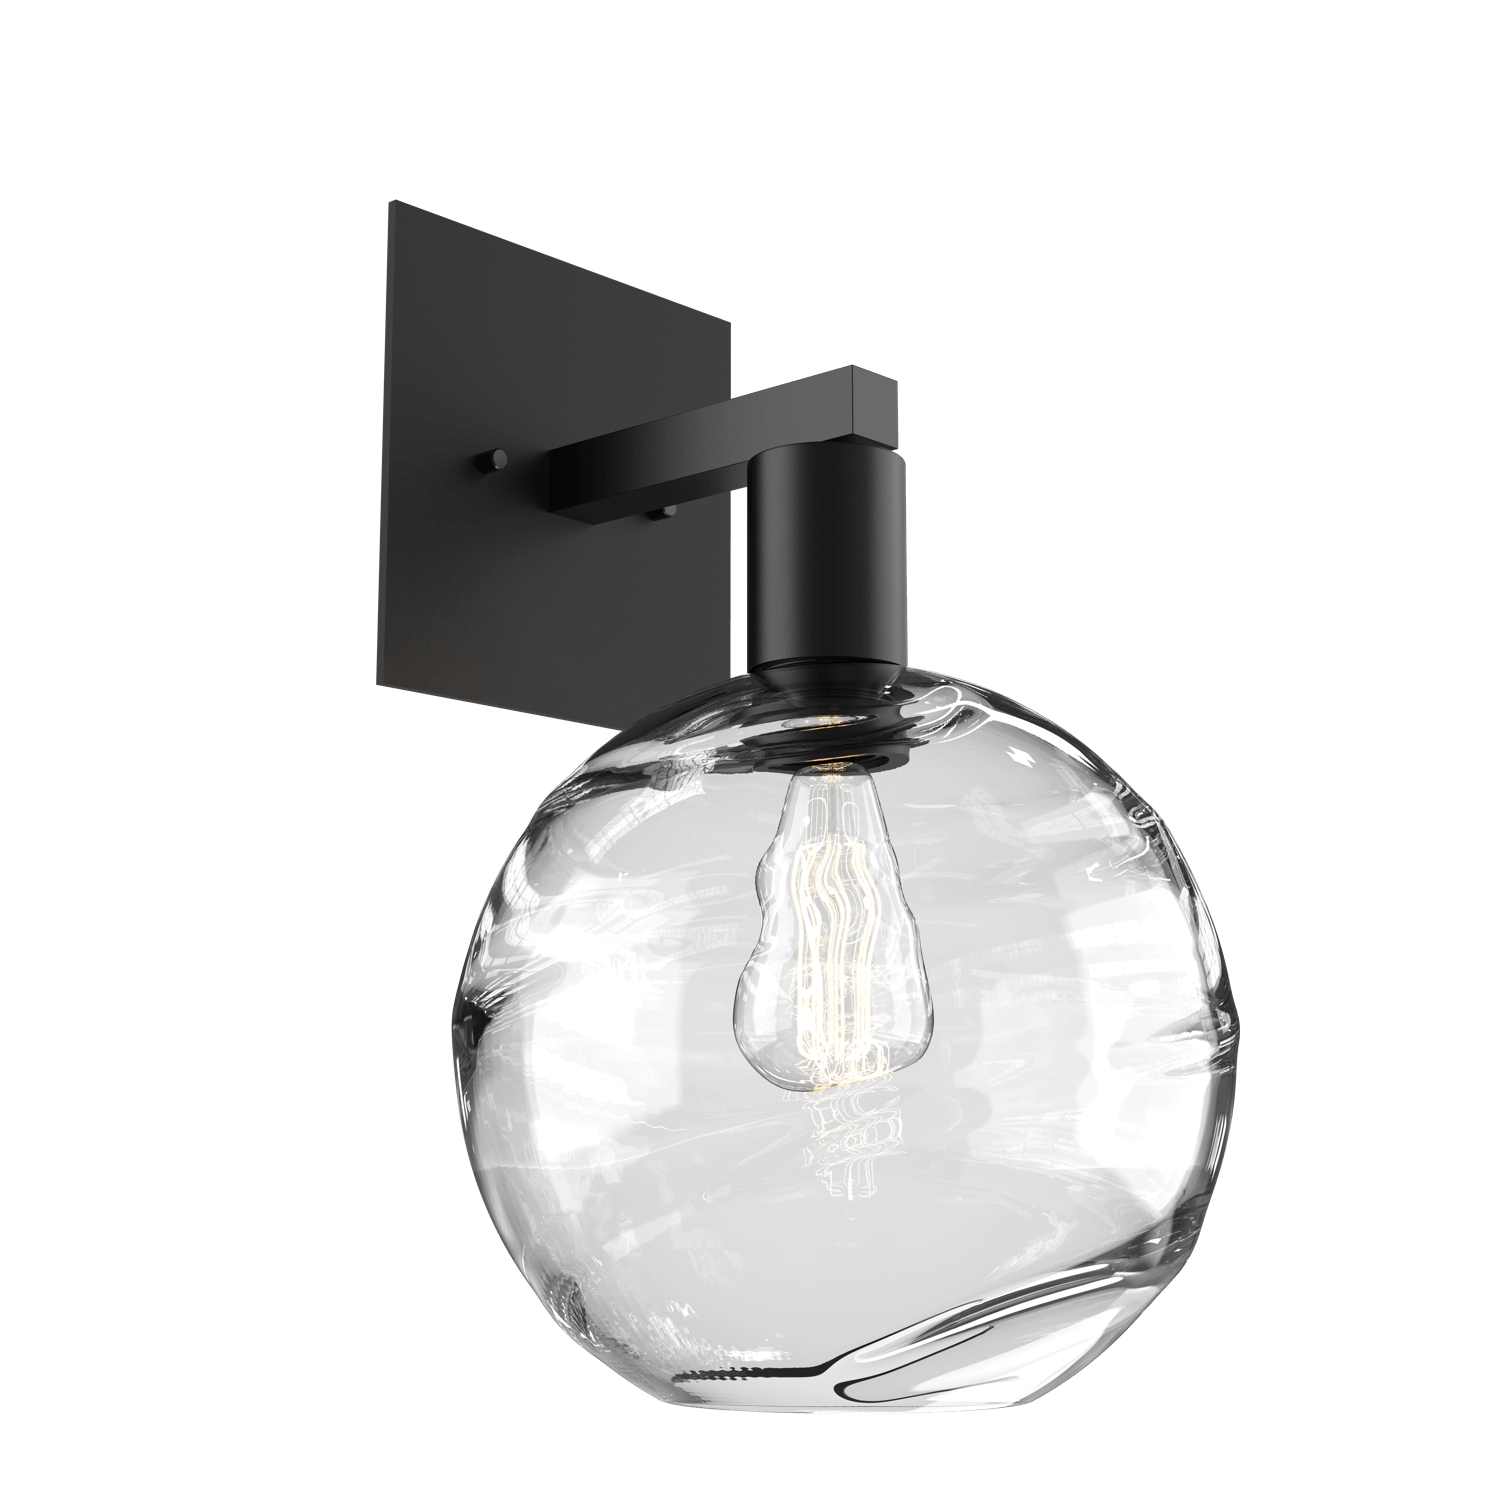 IDB0047-14-MB-OC-Hammerton-Studio-Optic-Blown-Glass-Terra-wall-sconce-with-matte-black-finish-and-optic-clear-blown-glass-shades-and-incandescent-lamping